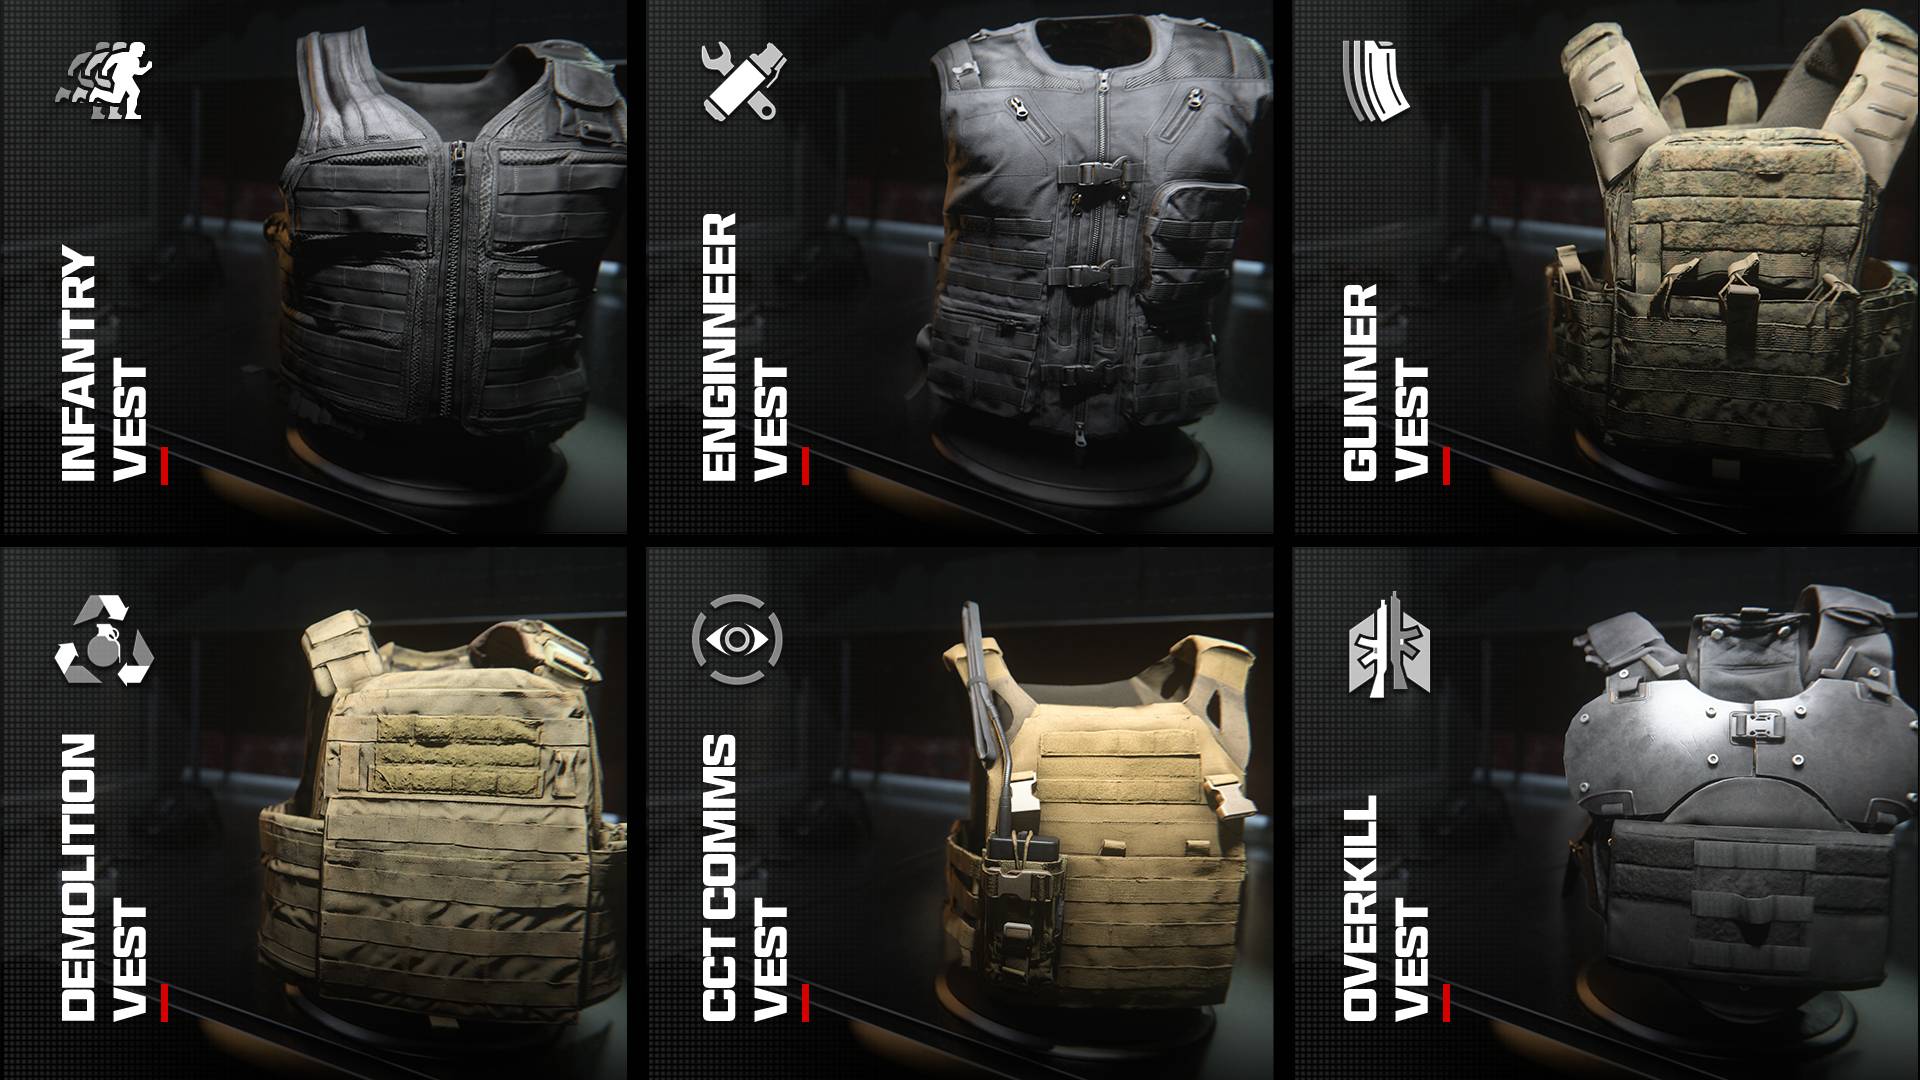 All MW3 equipment and perks